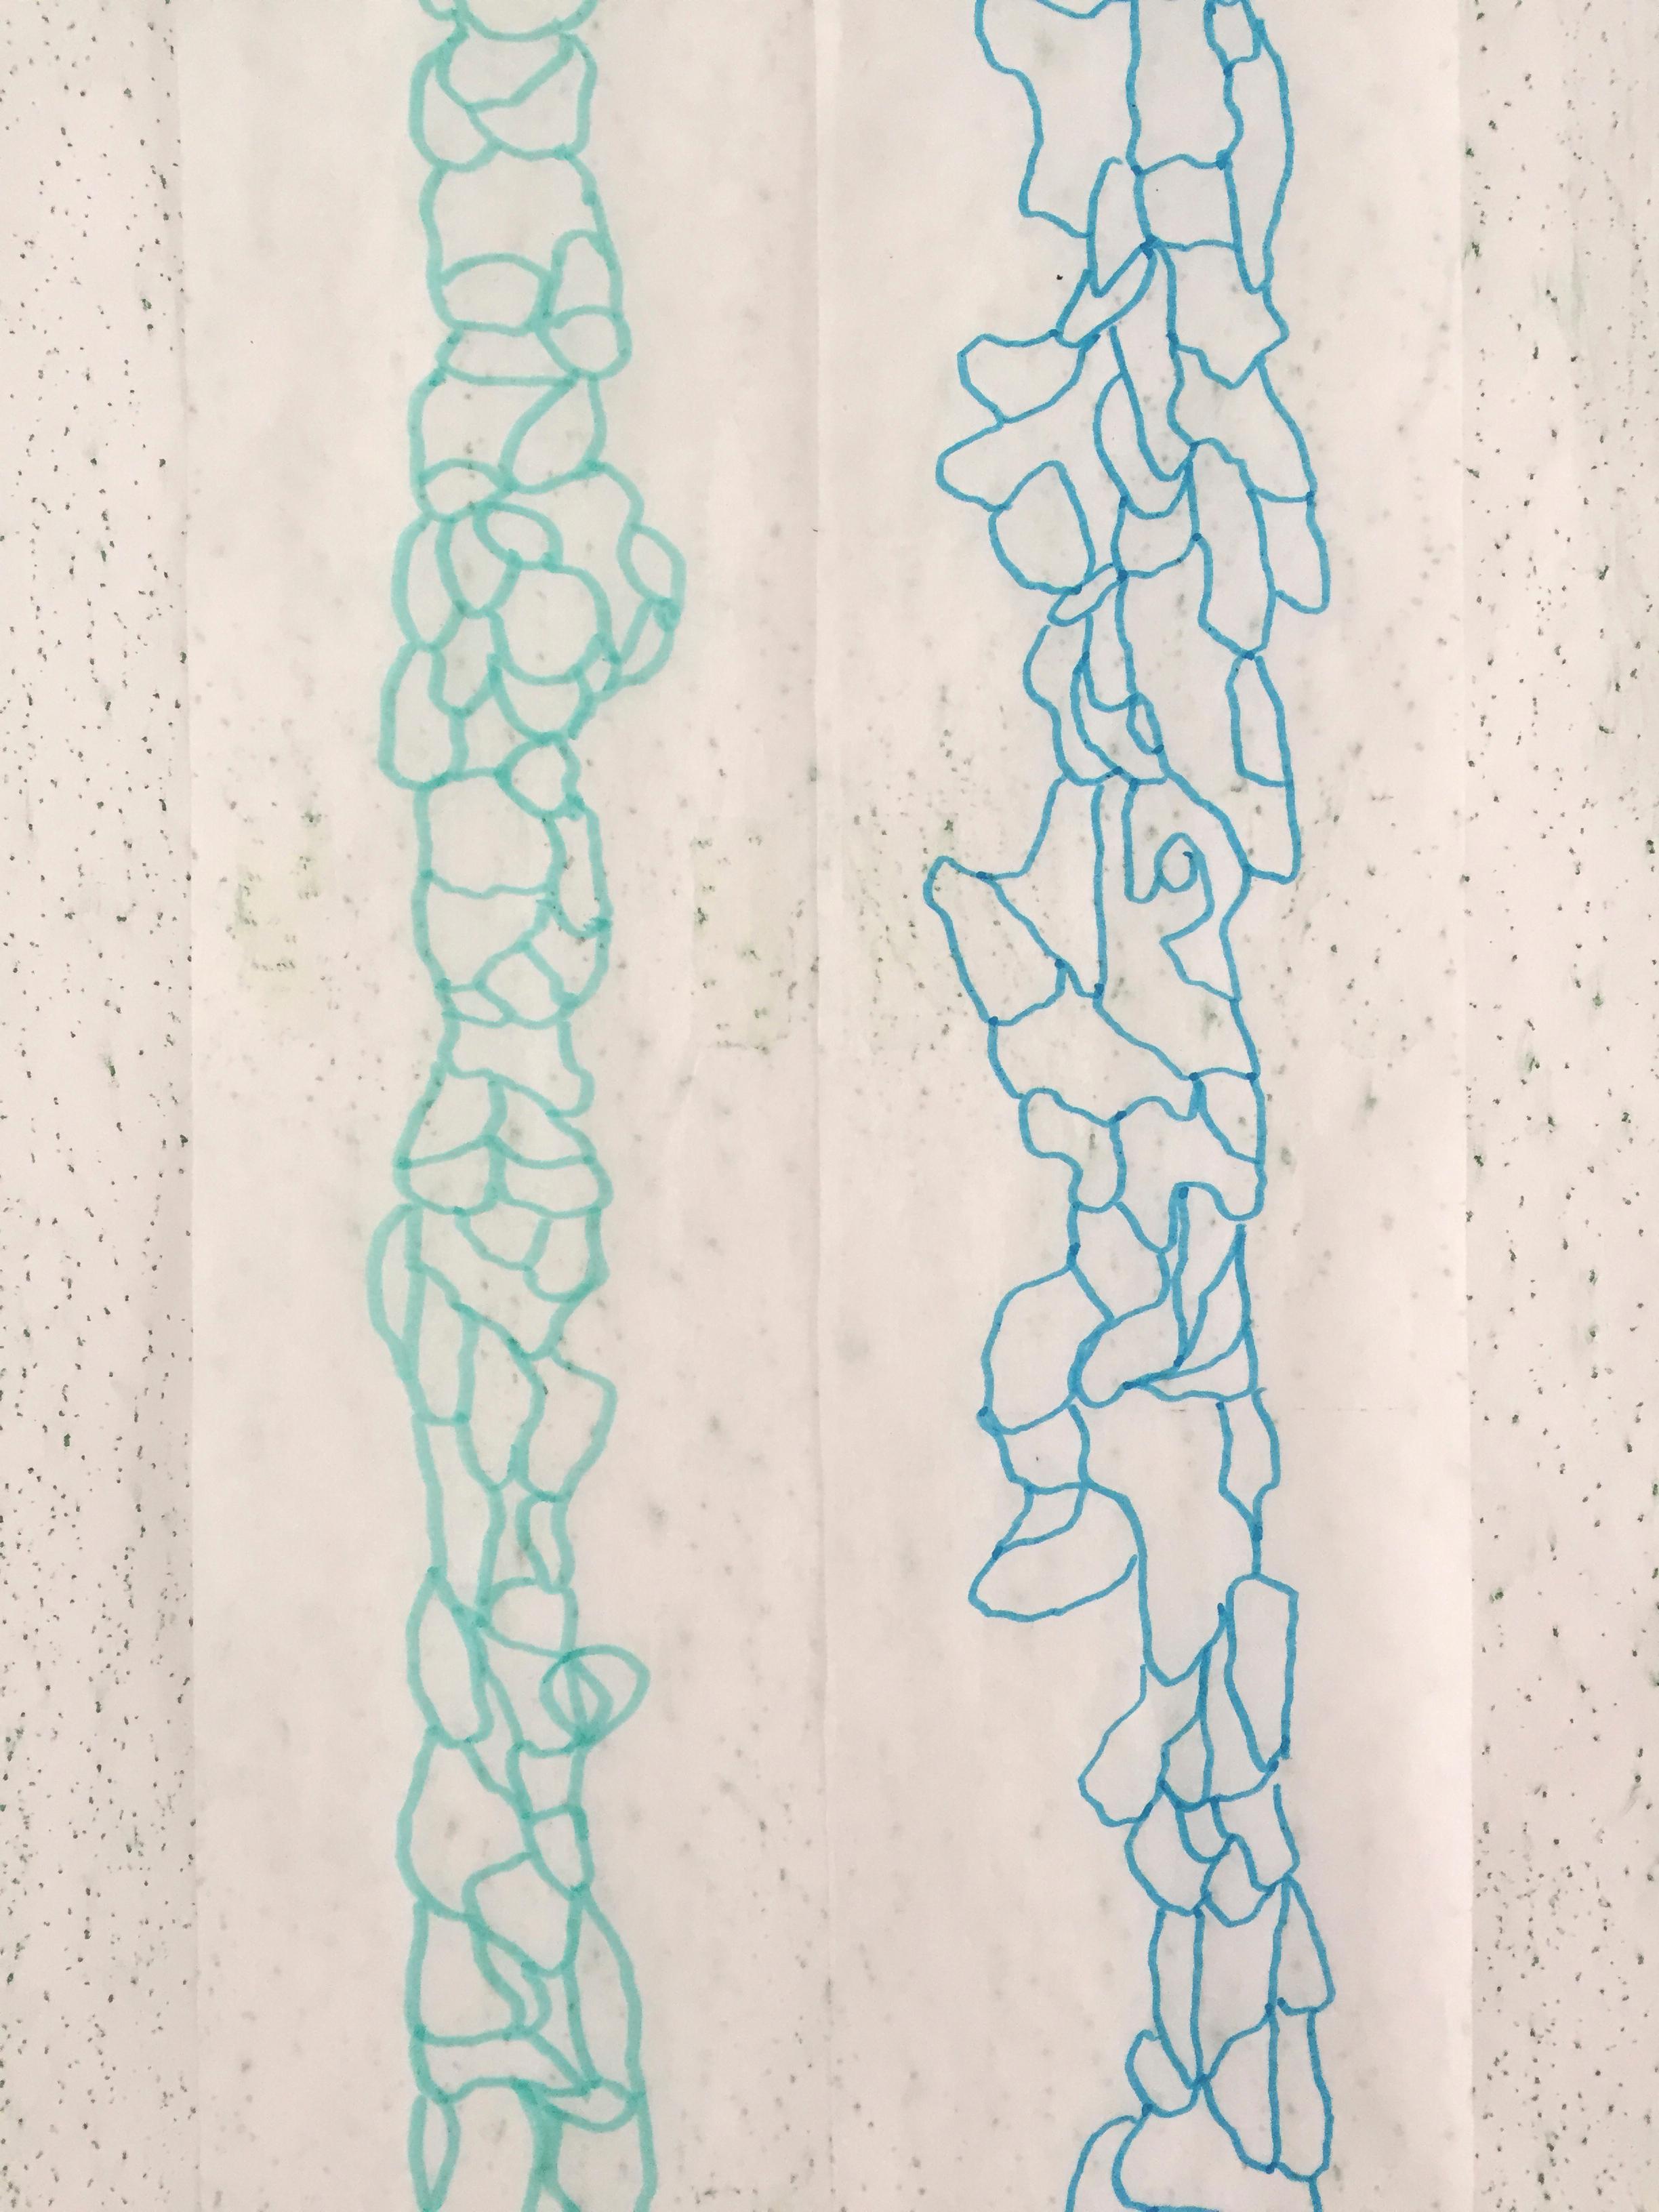 Deanna Lee, Surface Transcriptions-Long Wall, 2019, site responsive drawing 1